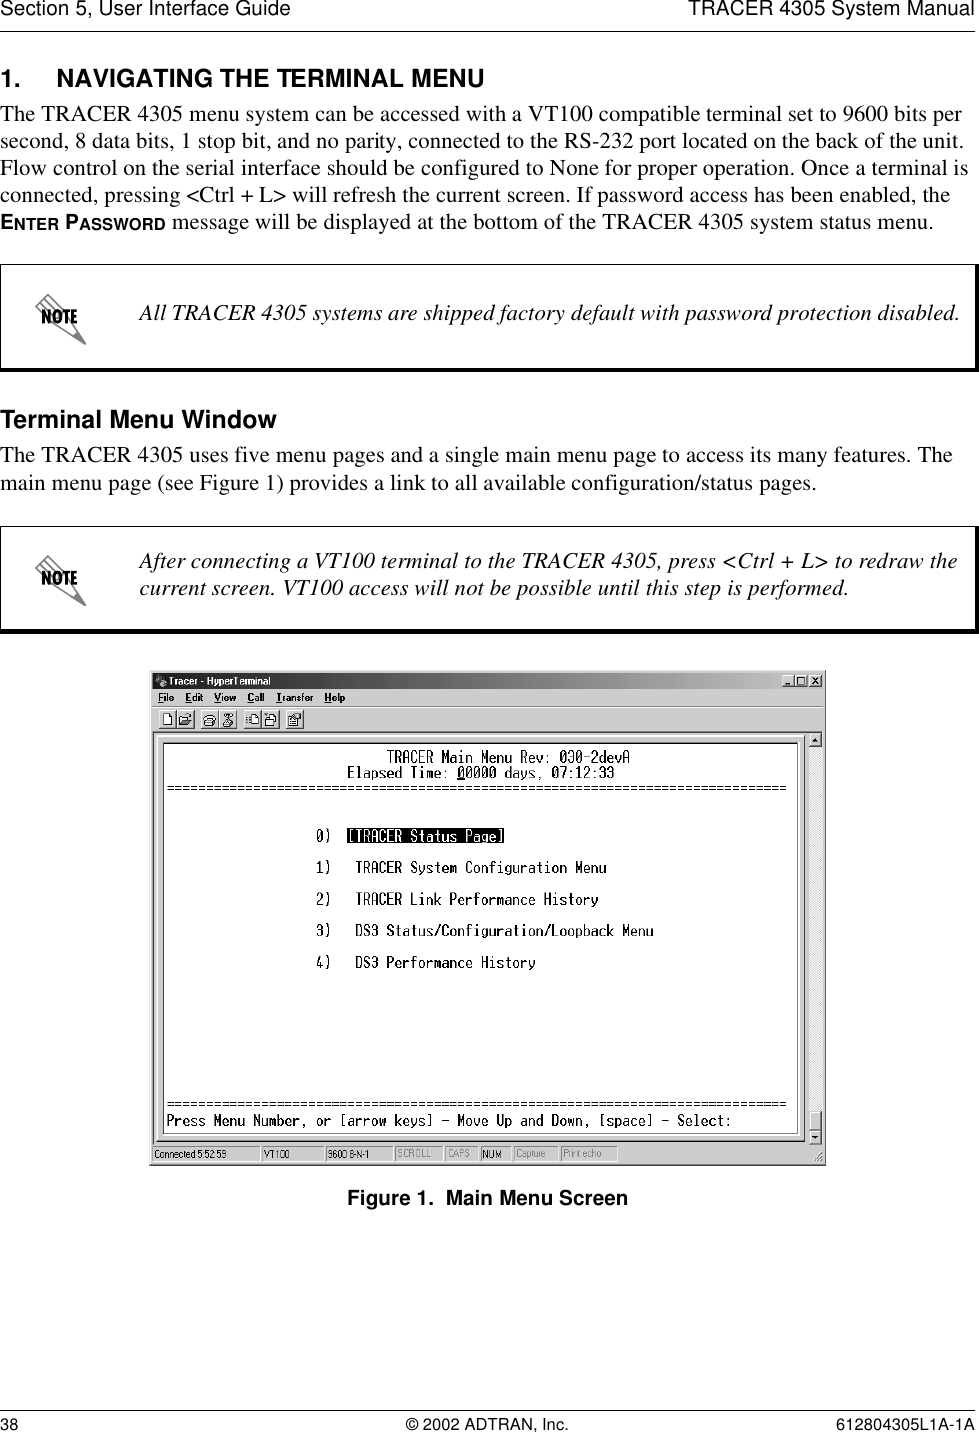 Section 5, User Interface Guide TRACER 4305 System Manual38 © 2002 ADTRAN, Inc. 612804305L1A-1A1. NAVIGATING THE TERMINAL MENUThe TRACER 4305 menu system can be accessed with a VT100 compatible terminal set to 9600 bits per second, 8 data bits, 1 stop bit, and no parity, connected to the RS-232 port located on the back of the unit. Flow control on the serial interface should be configured to None for proper operation. Once a terminal is connected, pressing &lt;Ctrl + L&gt; will refresh the current screen. If password access has been enabled, the ENTER PASSWORD message will be displayed at the bottom of the TRACER 4305 system status menu. Terminal Menu WindowThe TRACER 4305 uses five menu pages and a single main menu page to access its many features. The main menu page (see Figure 1) provides a link to all available configuration/status pages.Figure 1.  Main Menu ScreenAll TRACER 4305 systems are shipped factory default with password protection disabled.After connecting a VT100 terminal to the TRACER 4305, press &lt;Ctrl + L&gt; to redraw the current screen. VT100 access will not be possible until this step is performed.